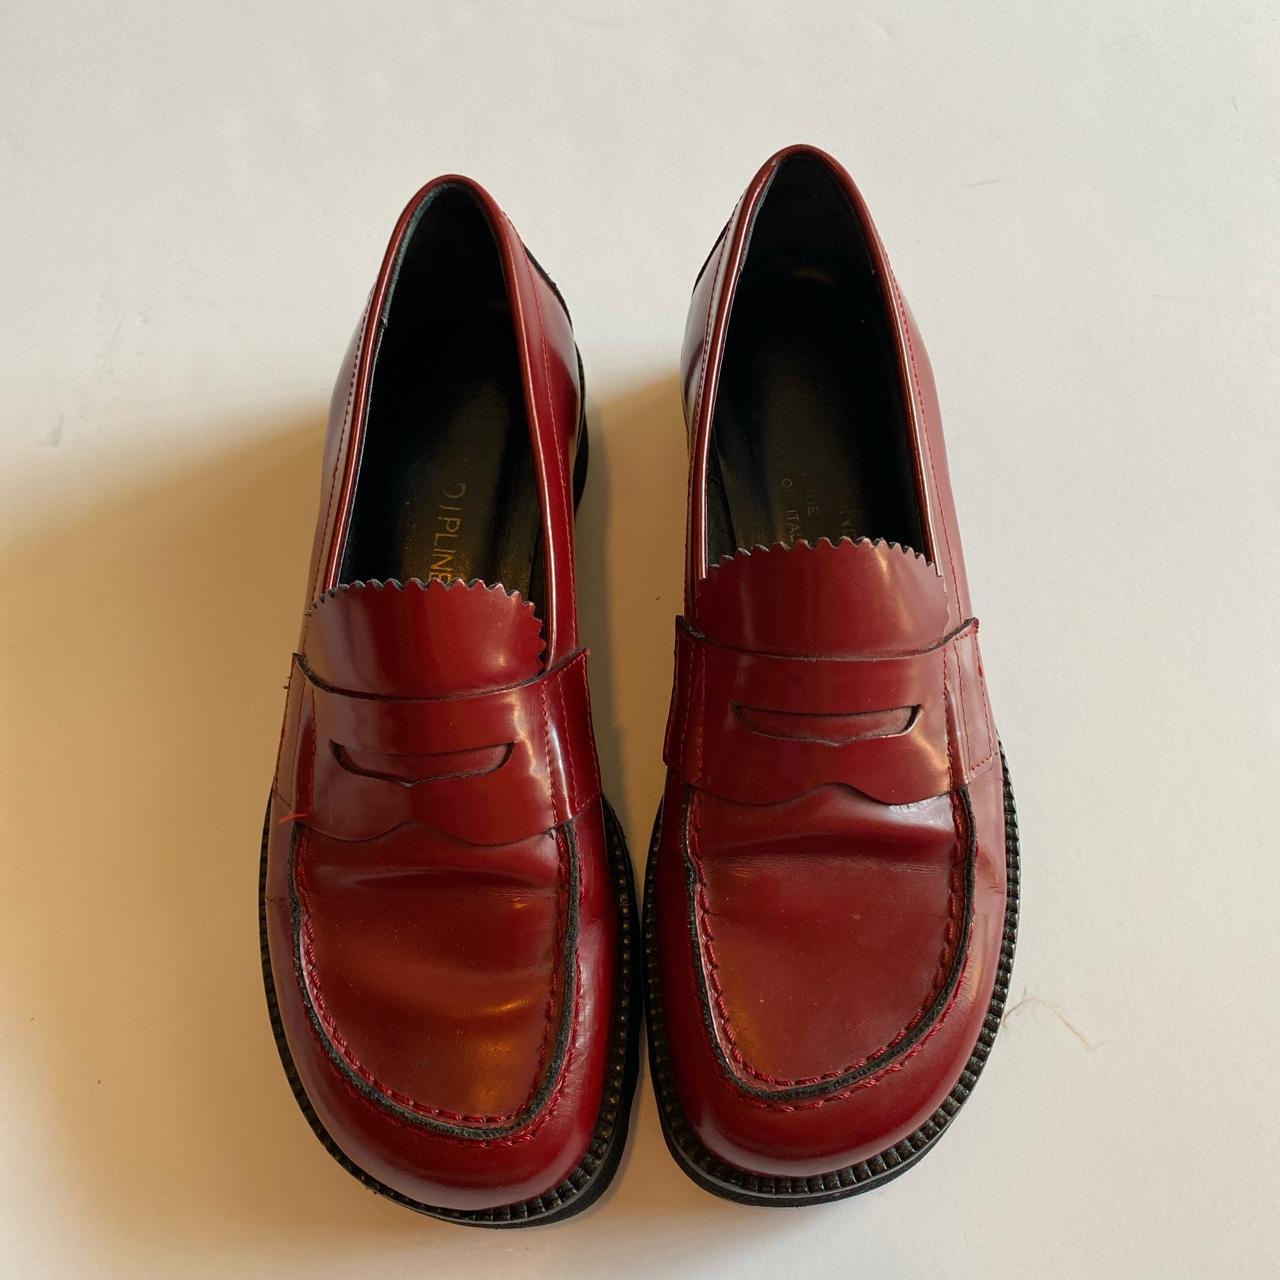 Donald Pliner Women's Red and Burgundy Loafers | Depop